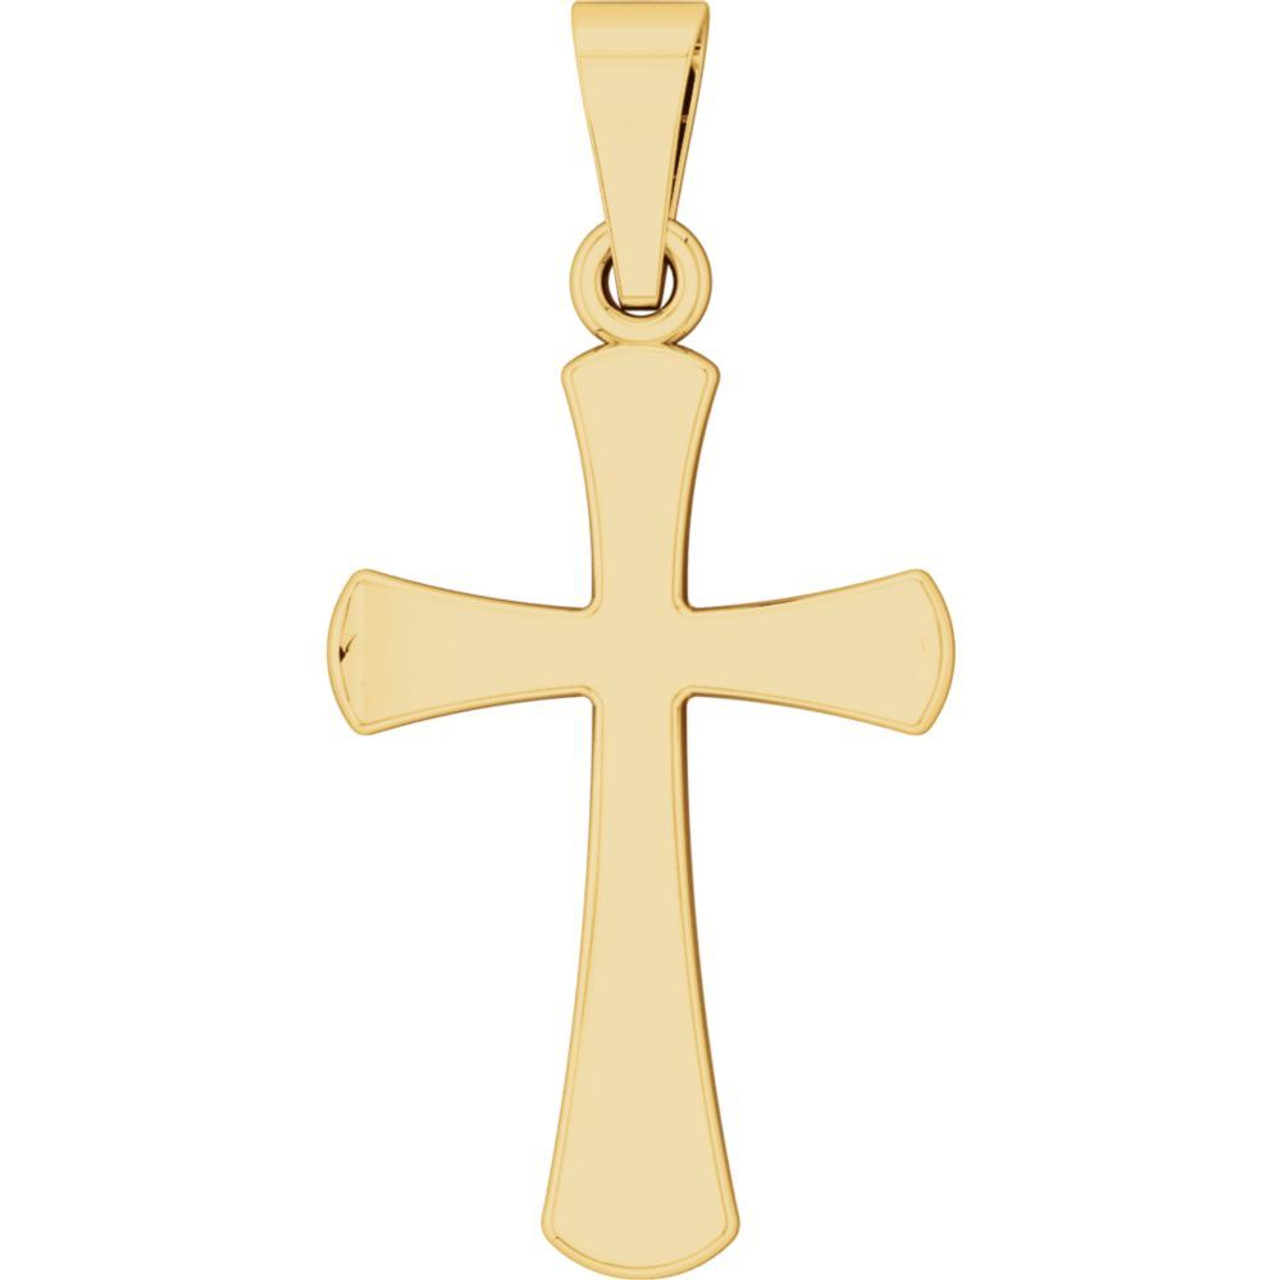 Macy's Children's Two-Tone Crucifix Pendant Necklace in 14k Gold - Macy's